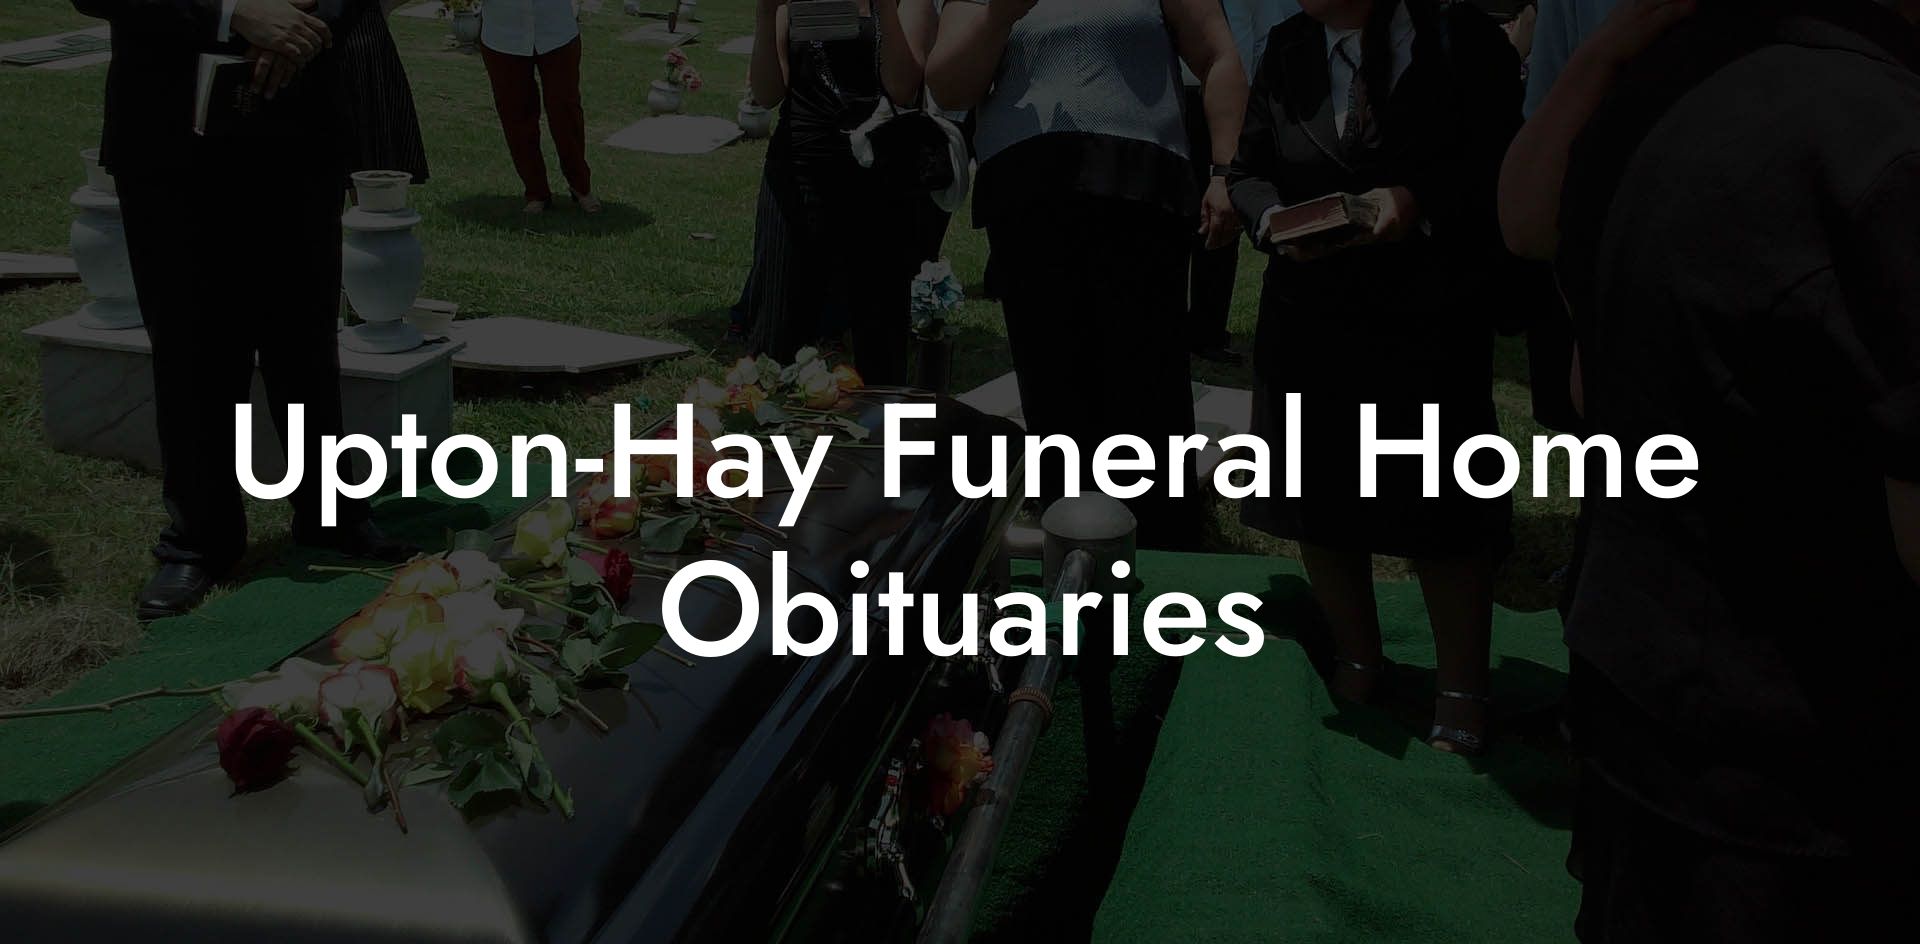 Upton-Hay Funeral Home Obituaries